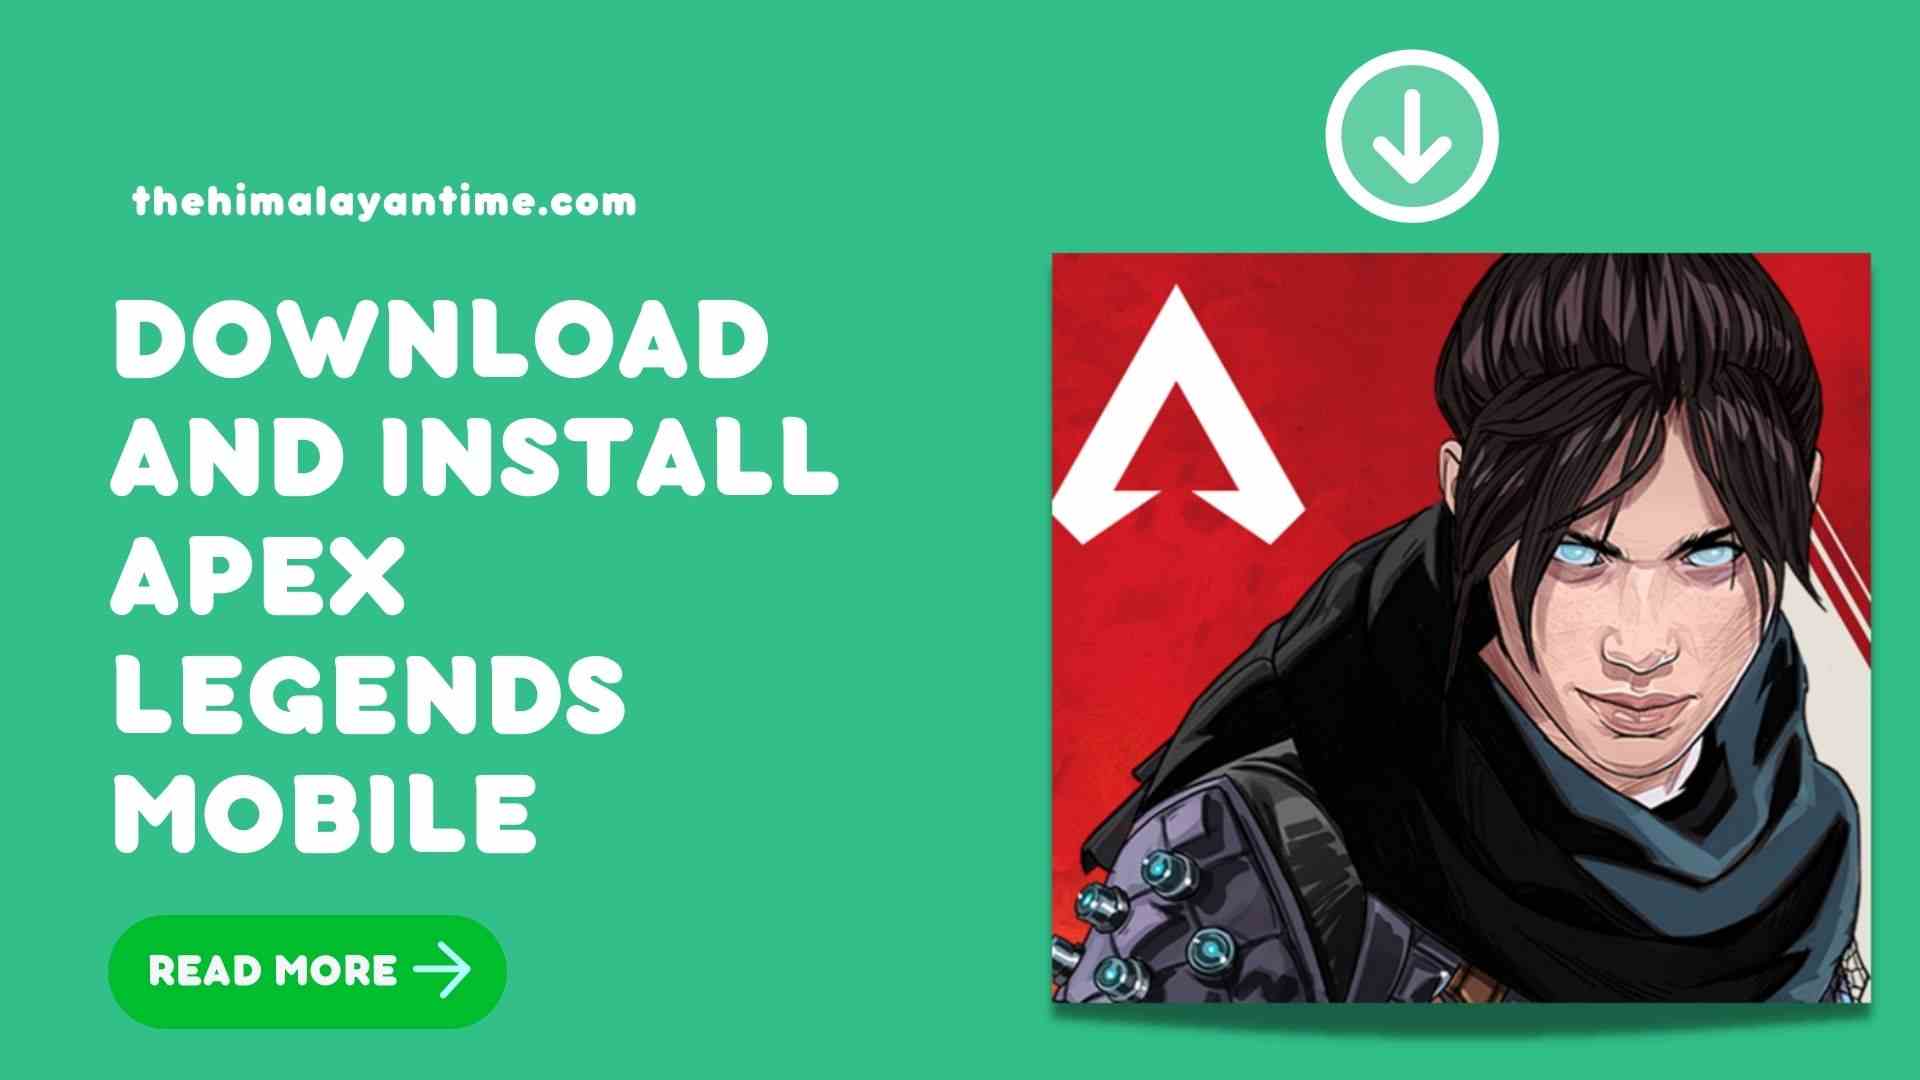 Download and Install Apex Legends Mobile